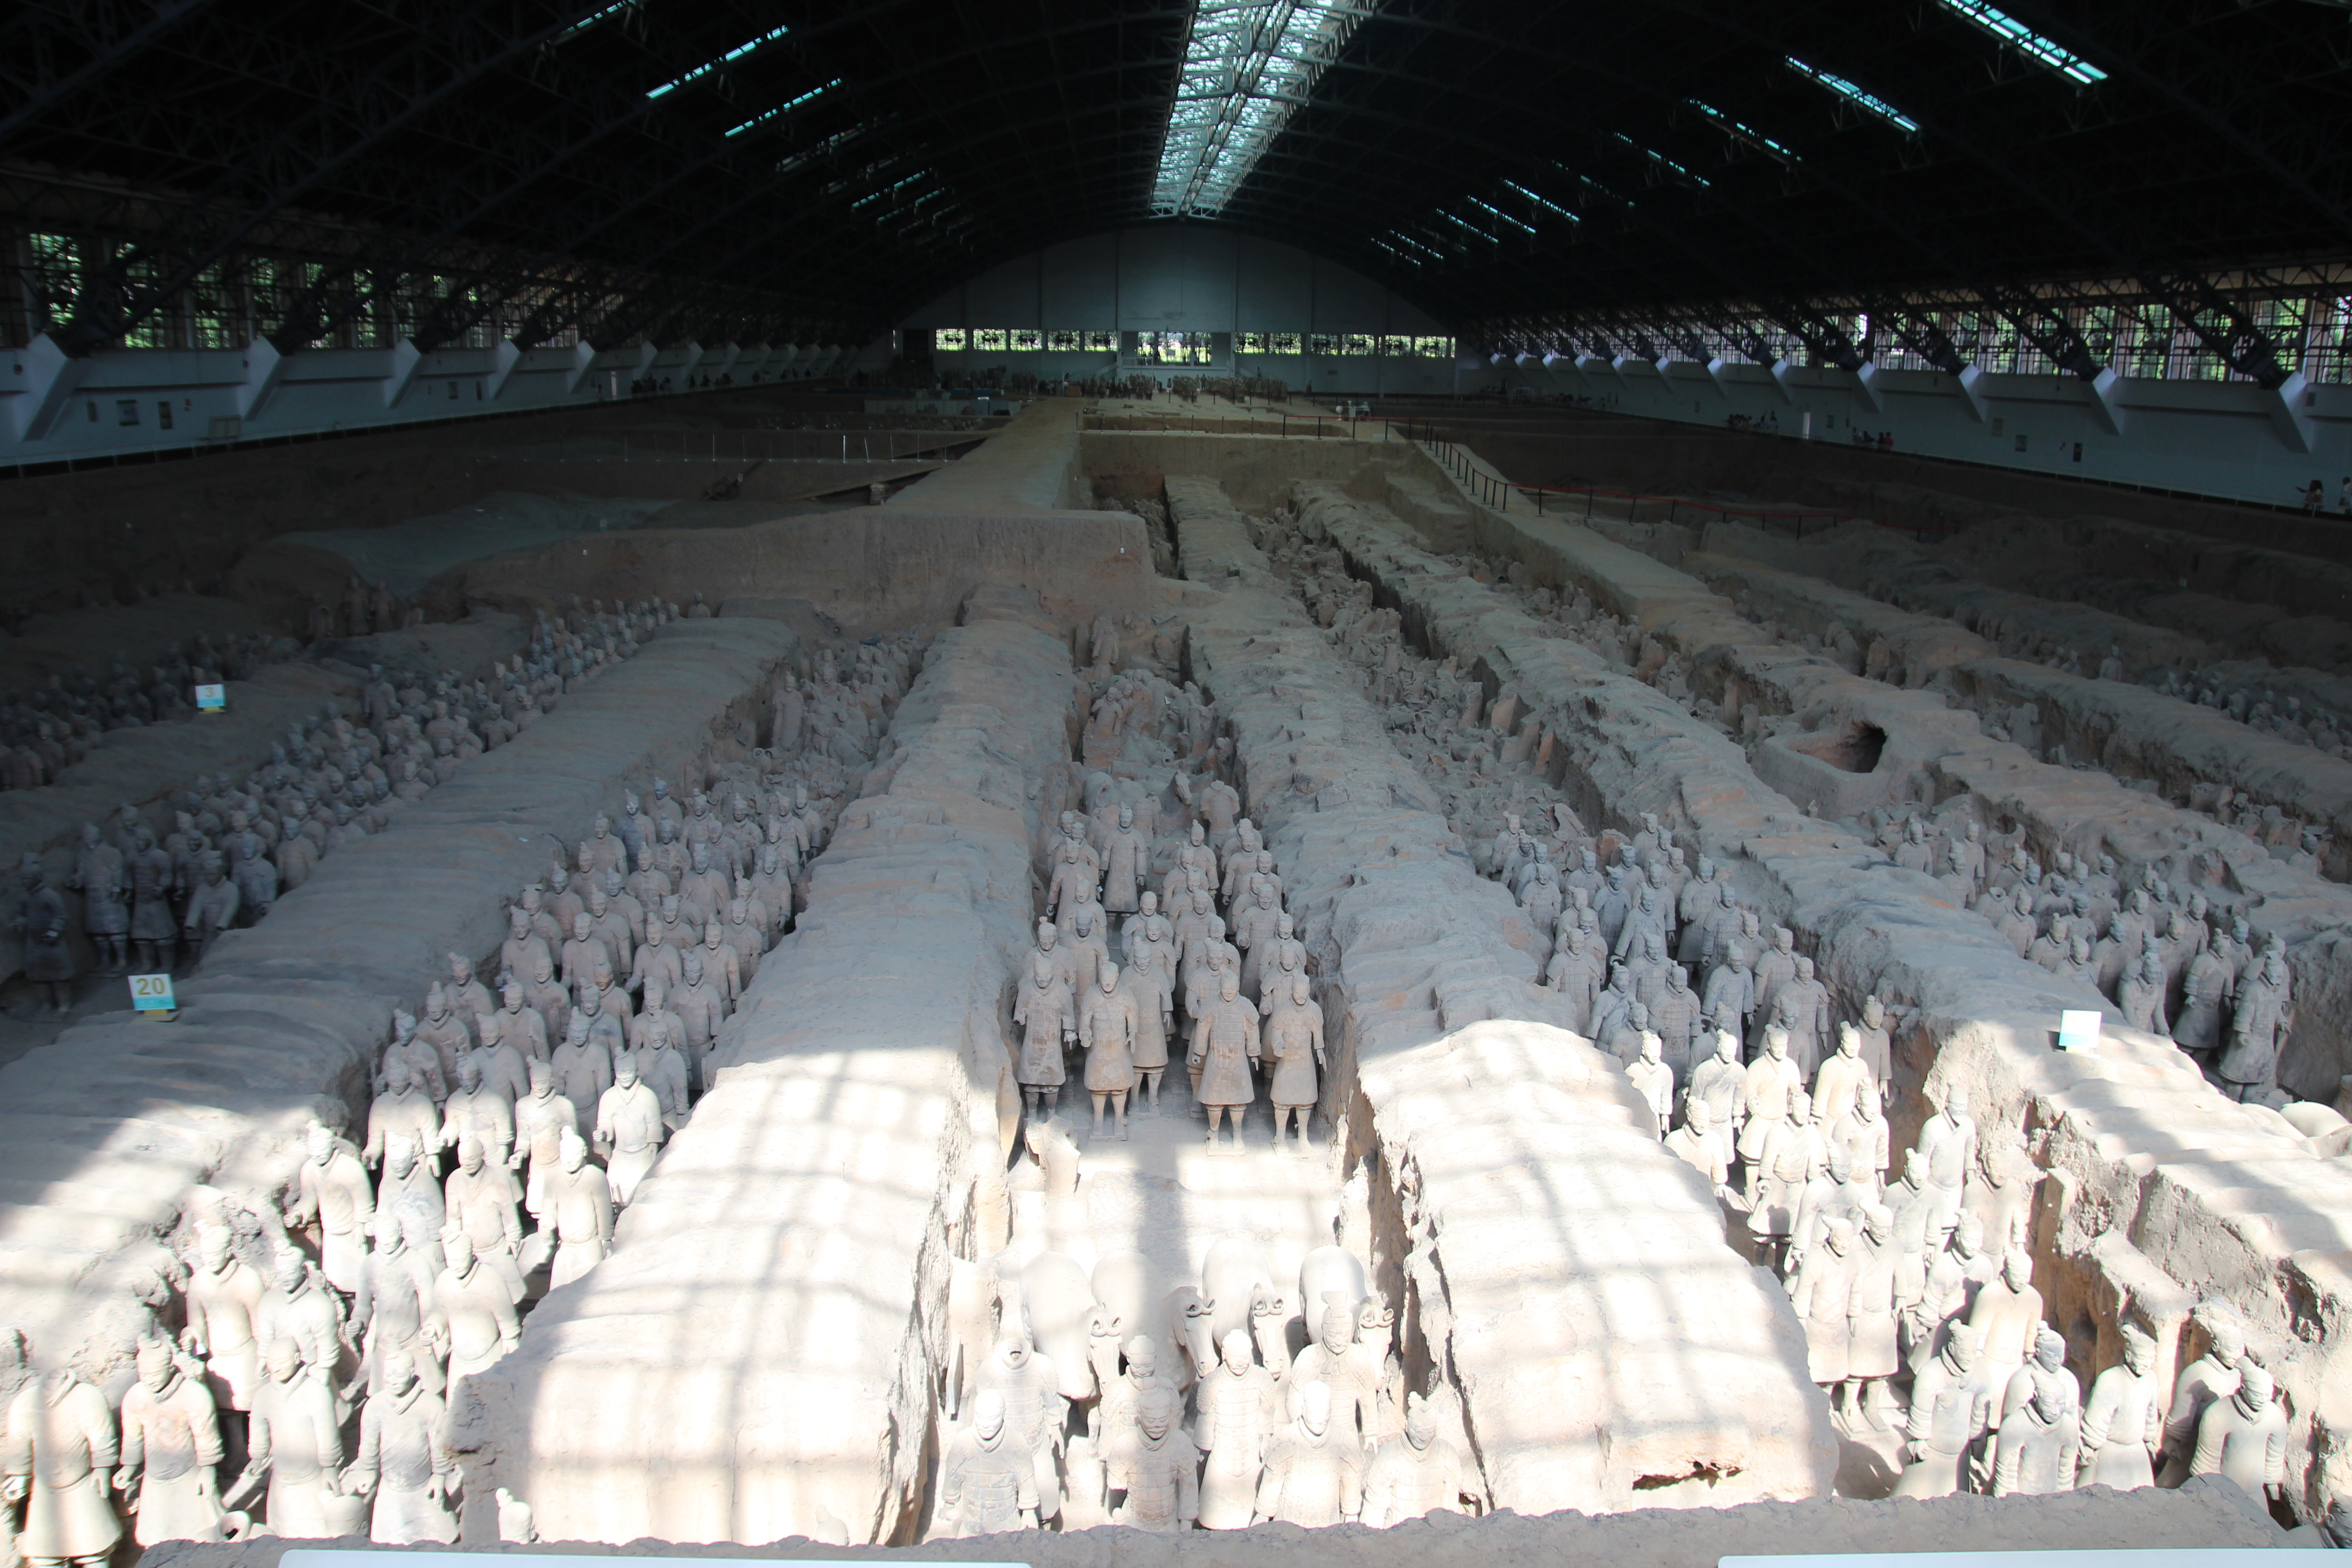 A visit to the terracotta army